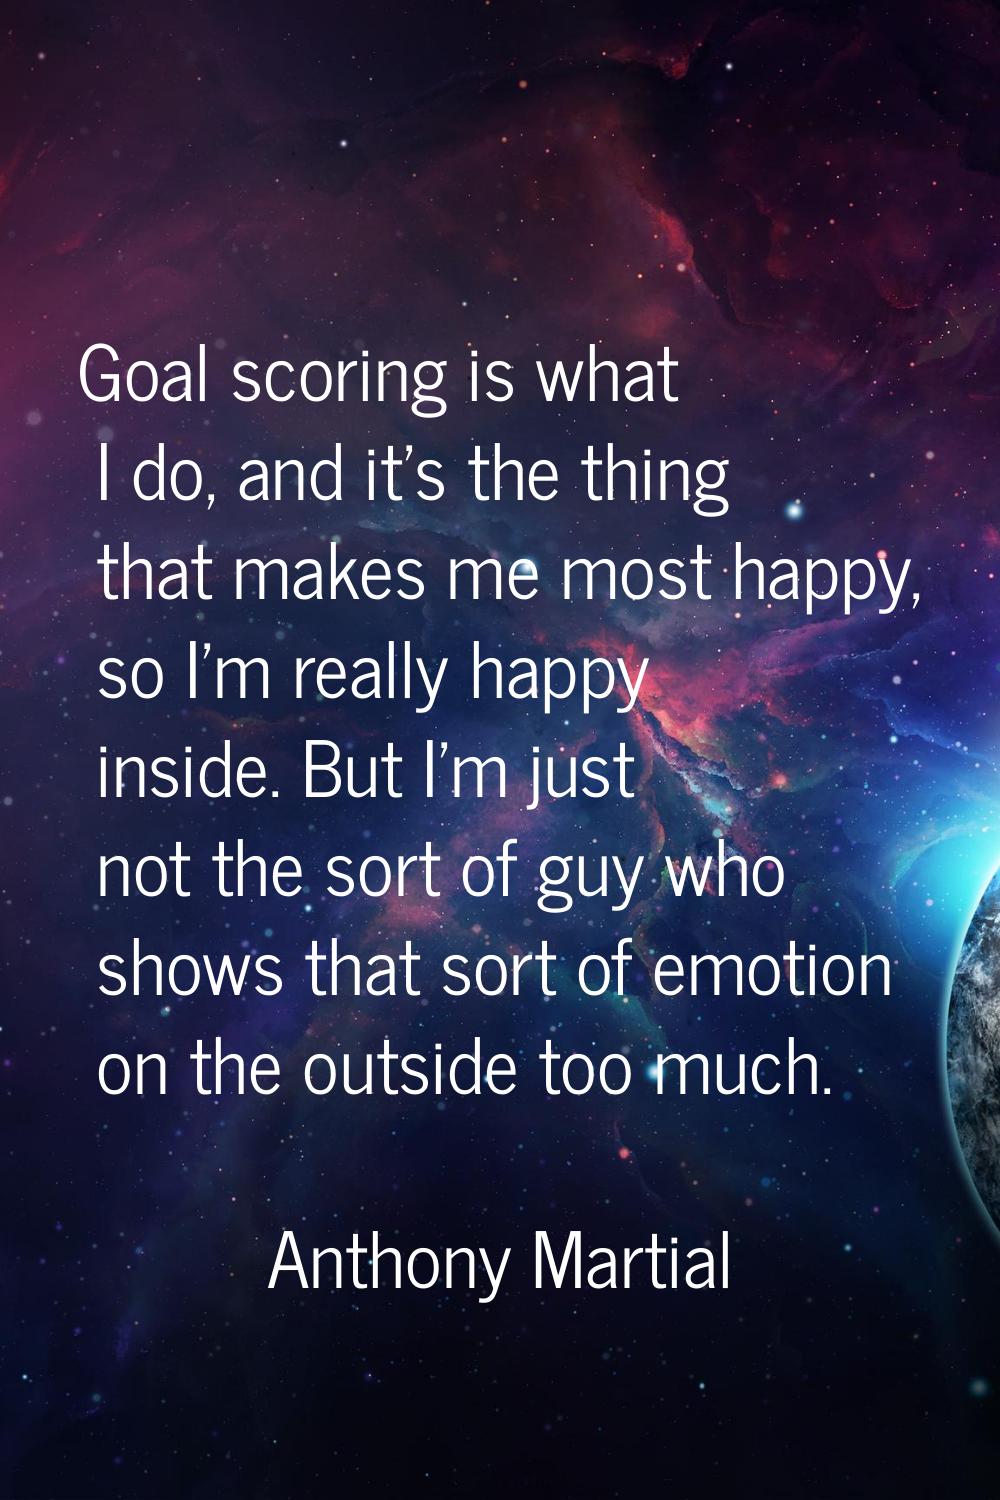 Goal scoring is what I do, and it's the thing that makes me most happy, so I'm really happy inside.